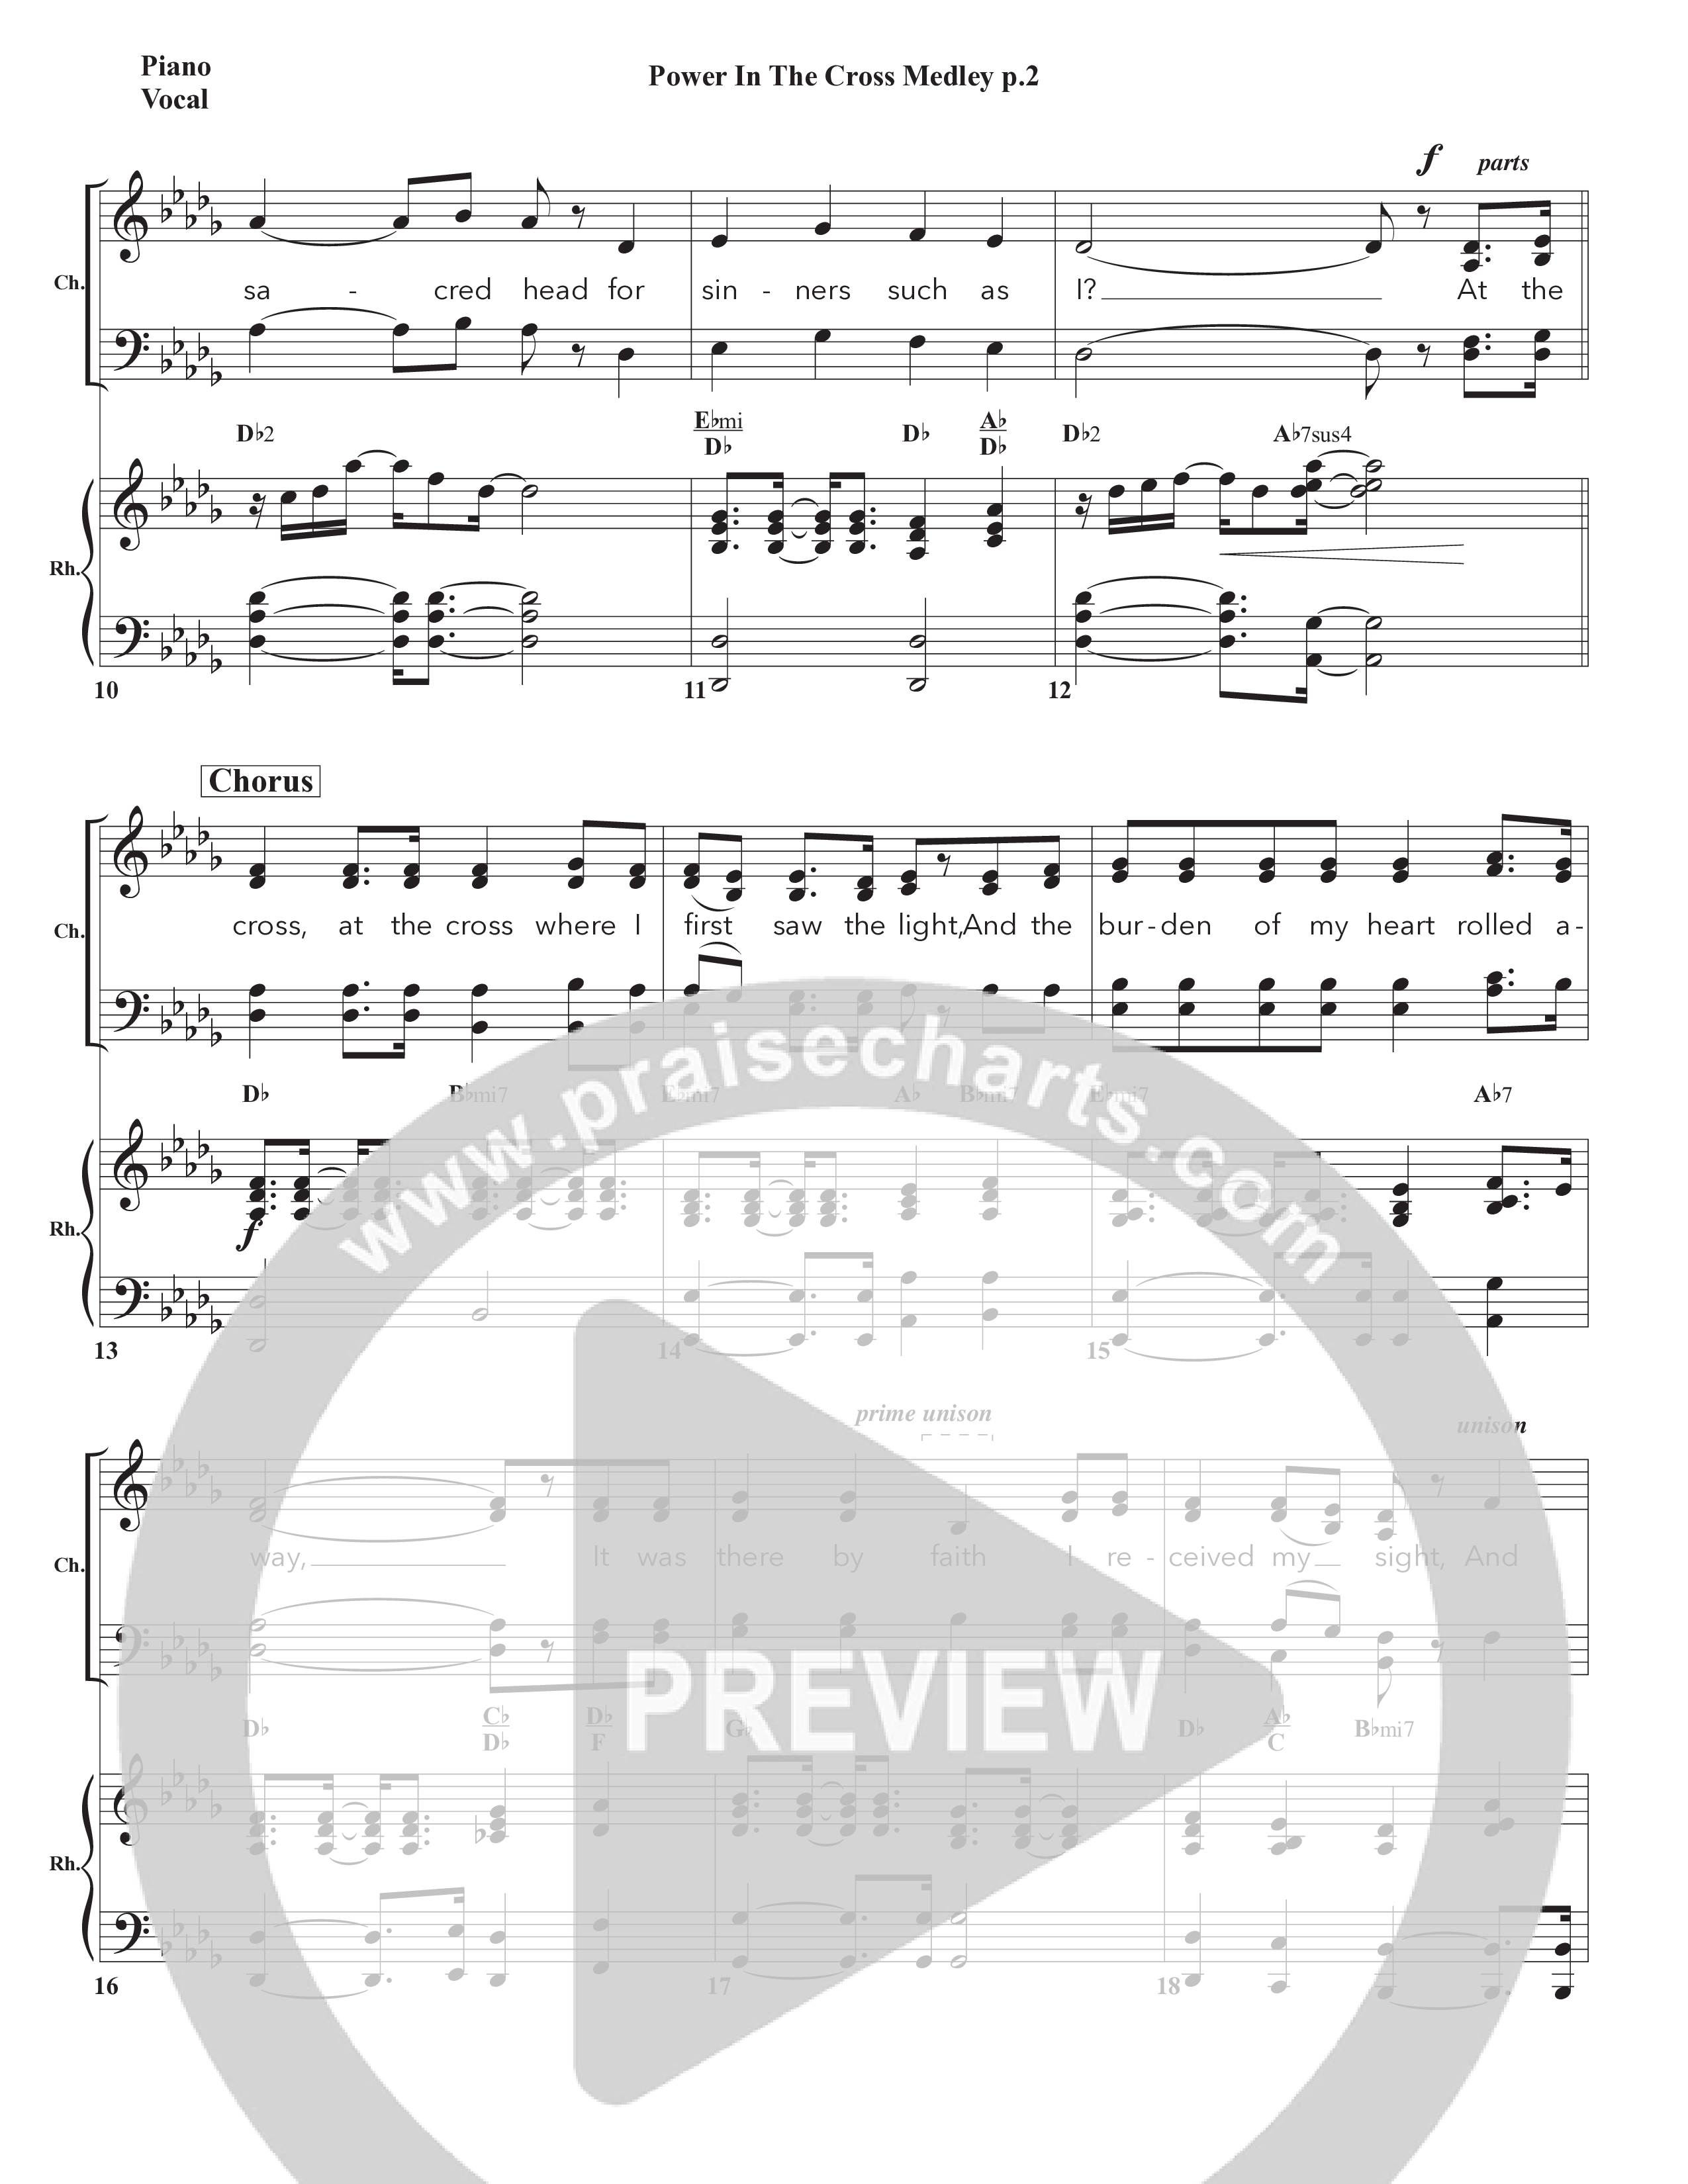 Power In The Cross Medley Piano/Vocal Pack (Chris Emert)